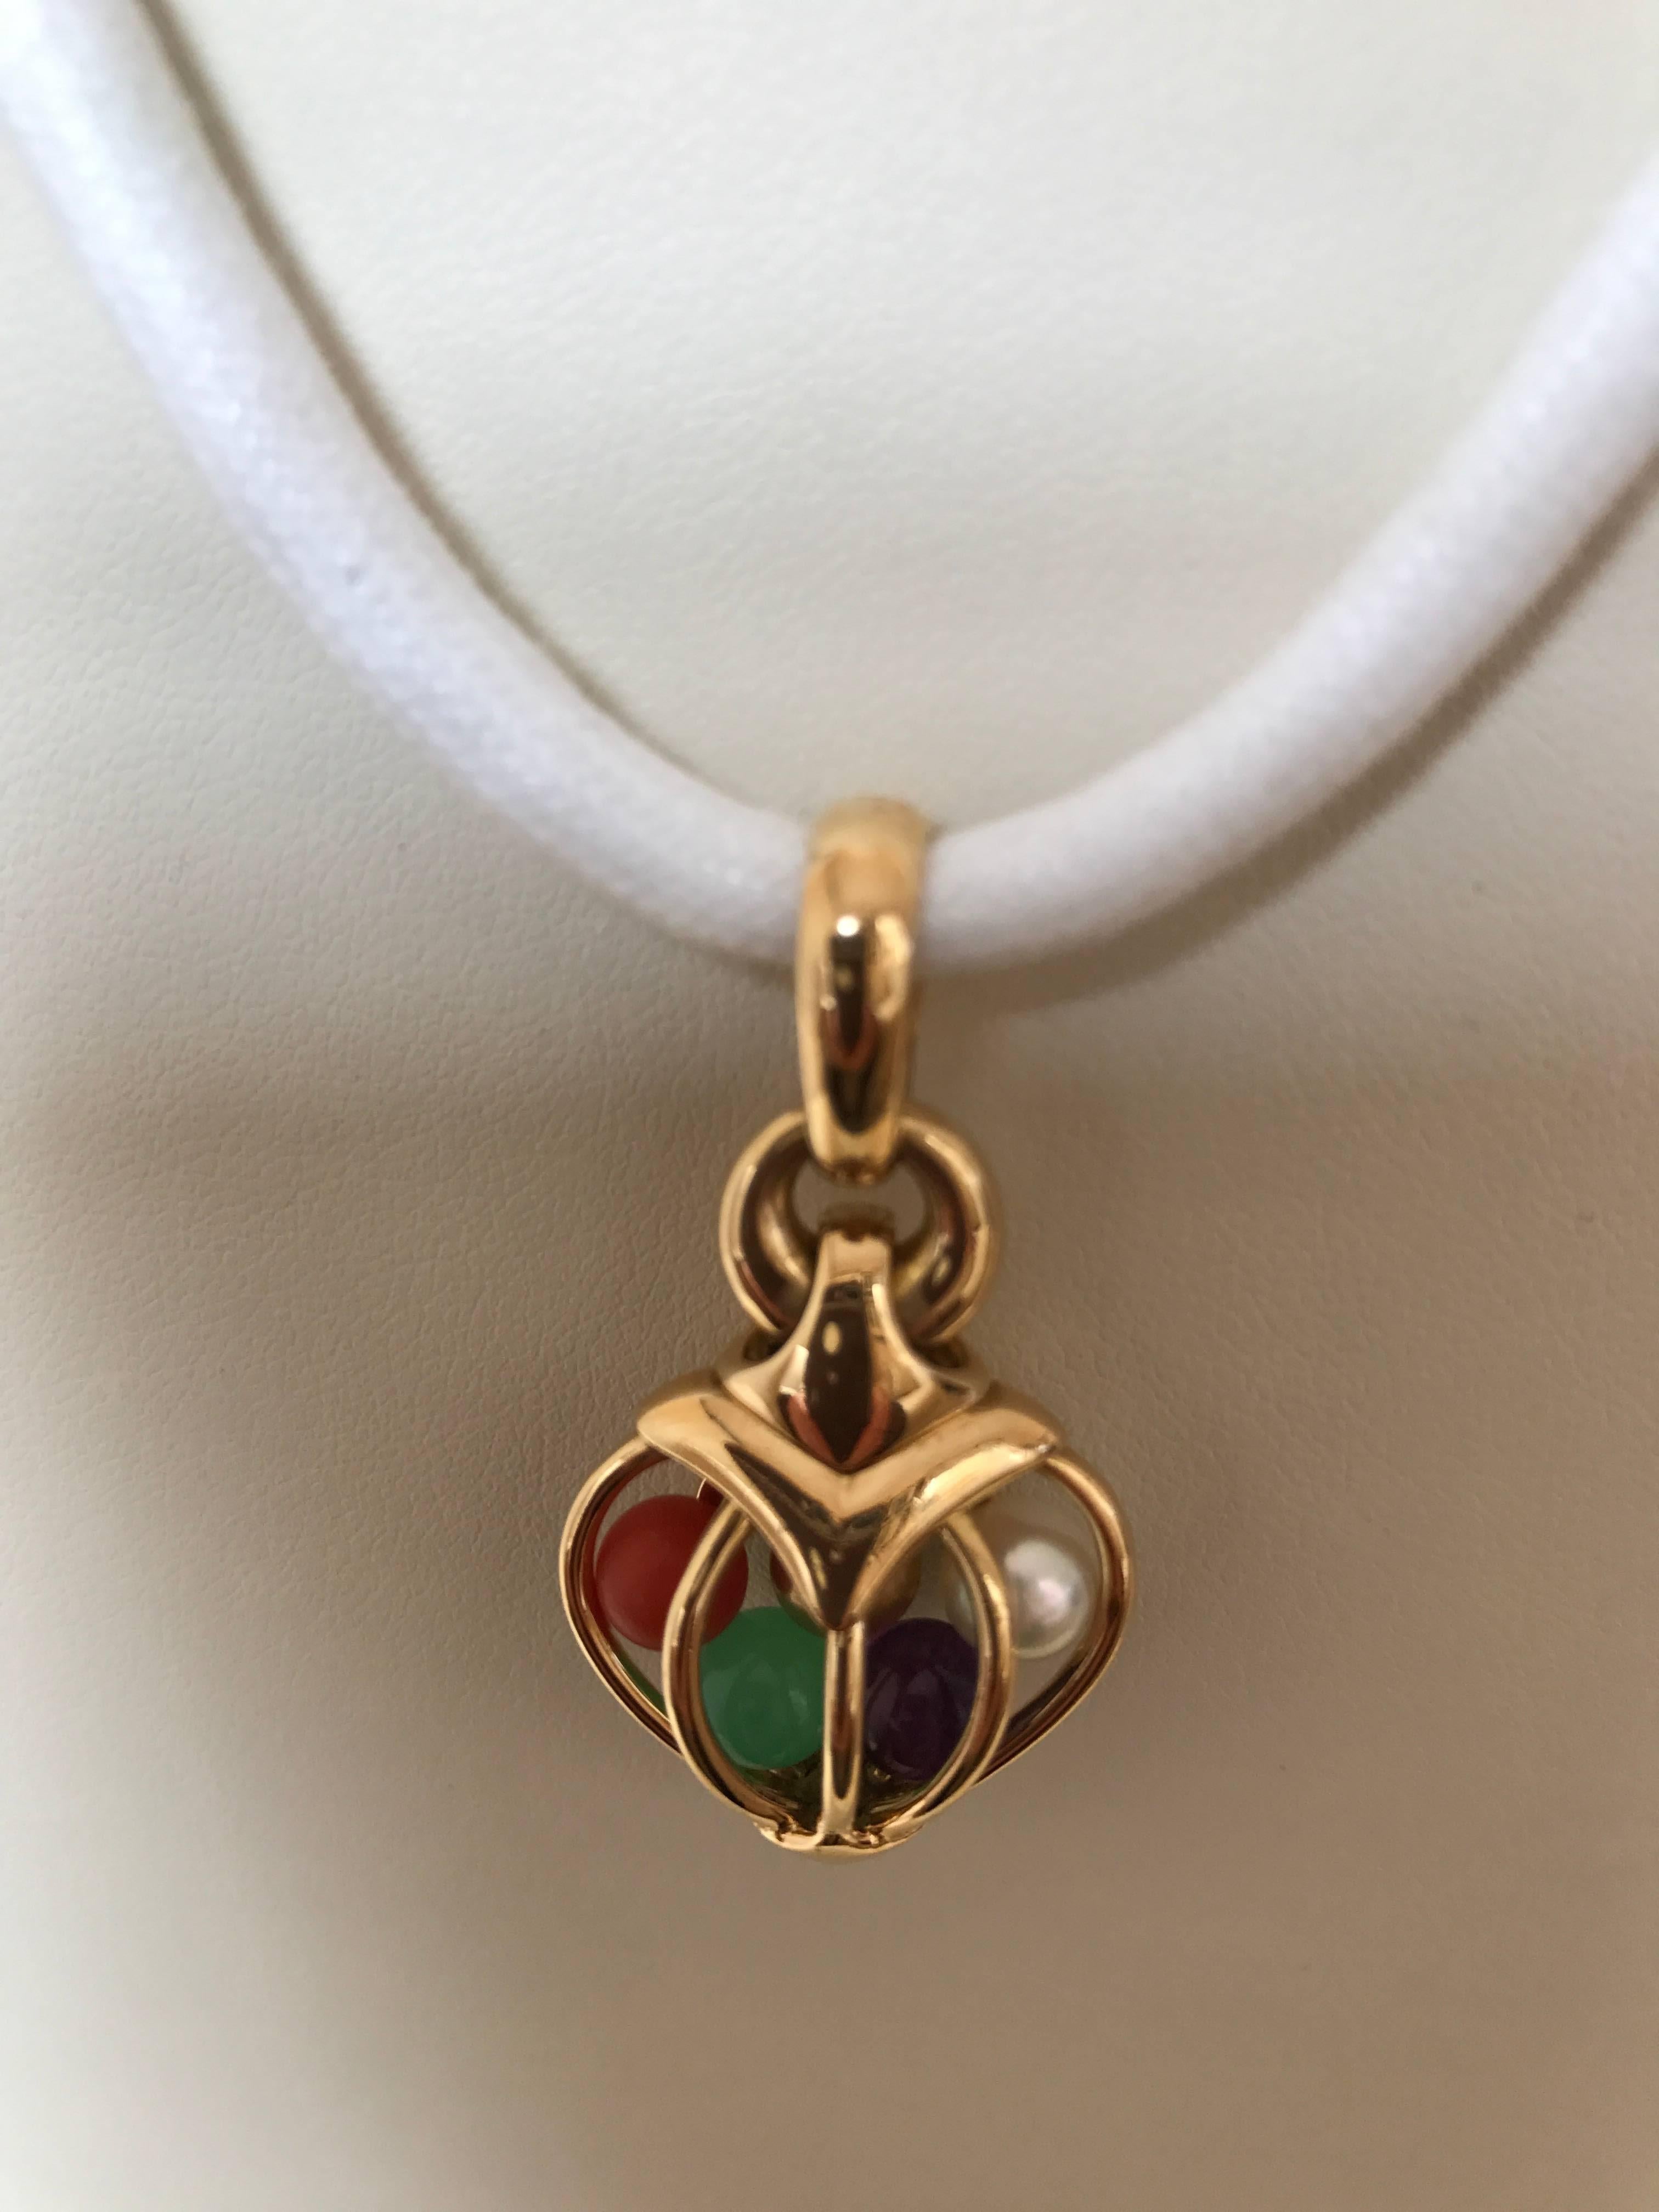 Circa 1970 Bvlgari Multi Gemstone 18K Yellow Gold Heart Pendant In Excellent Condition For Sale In London, GB